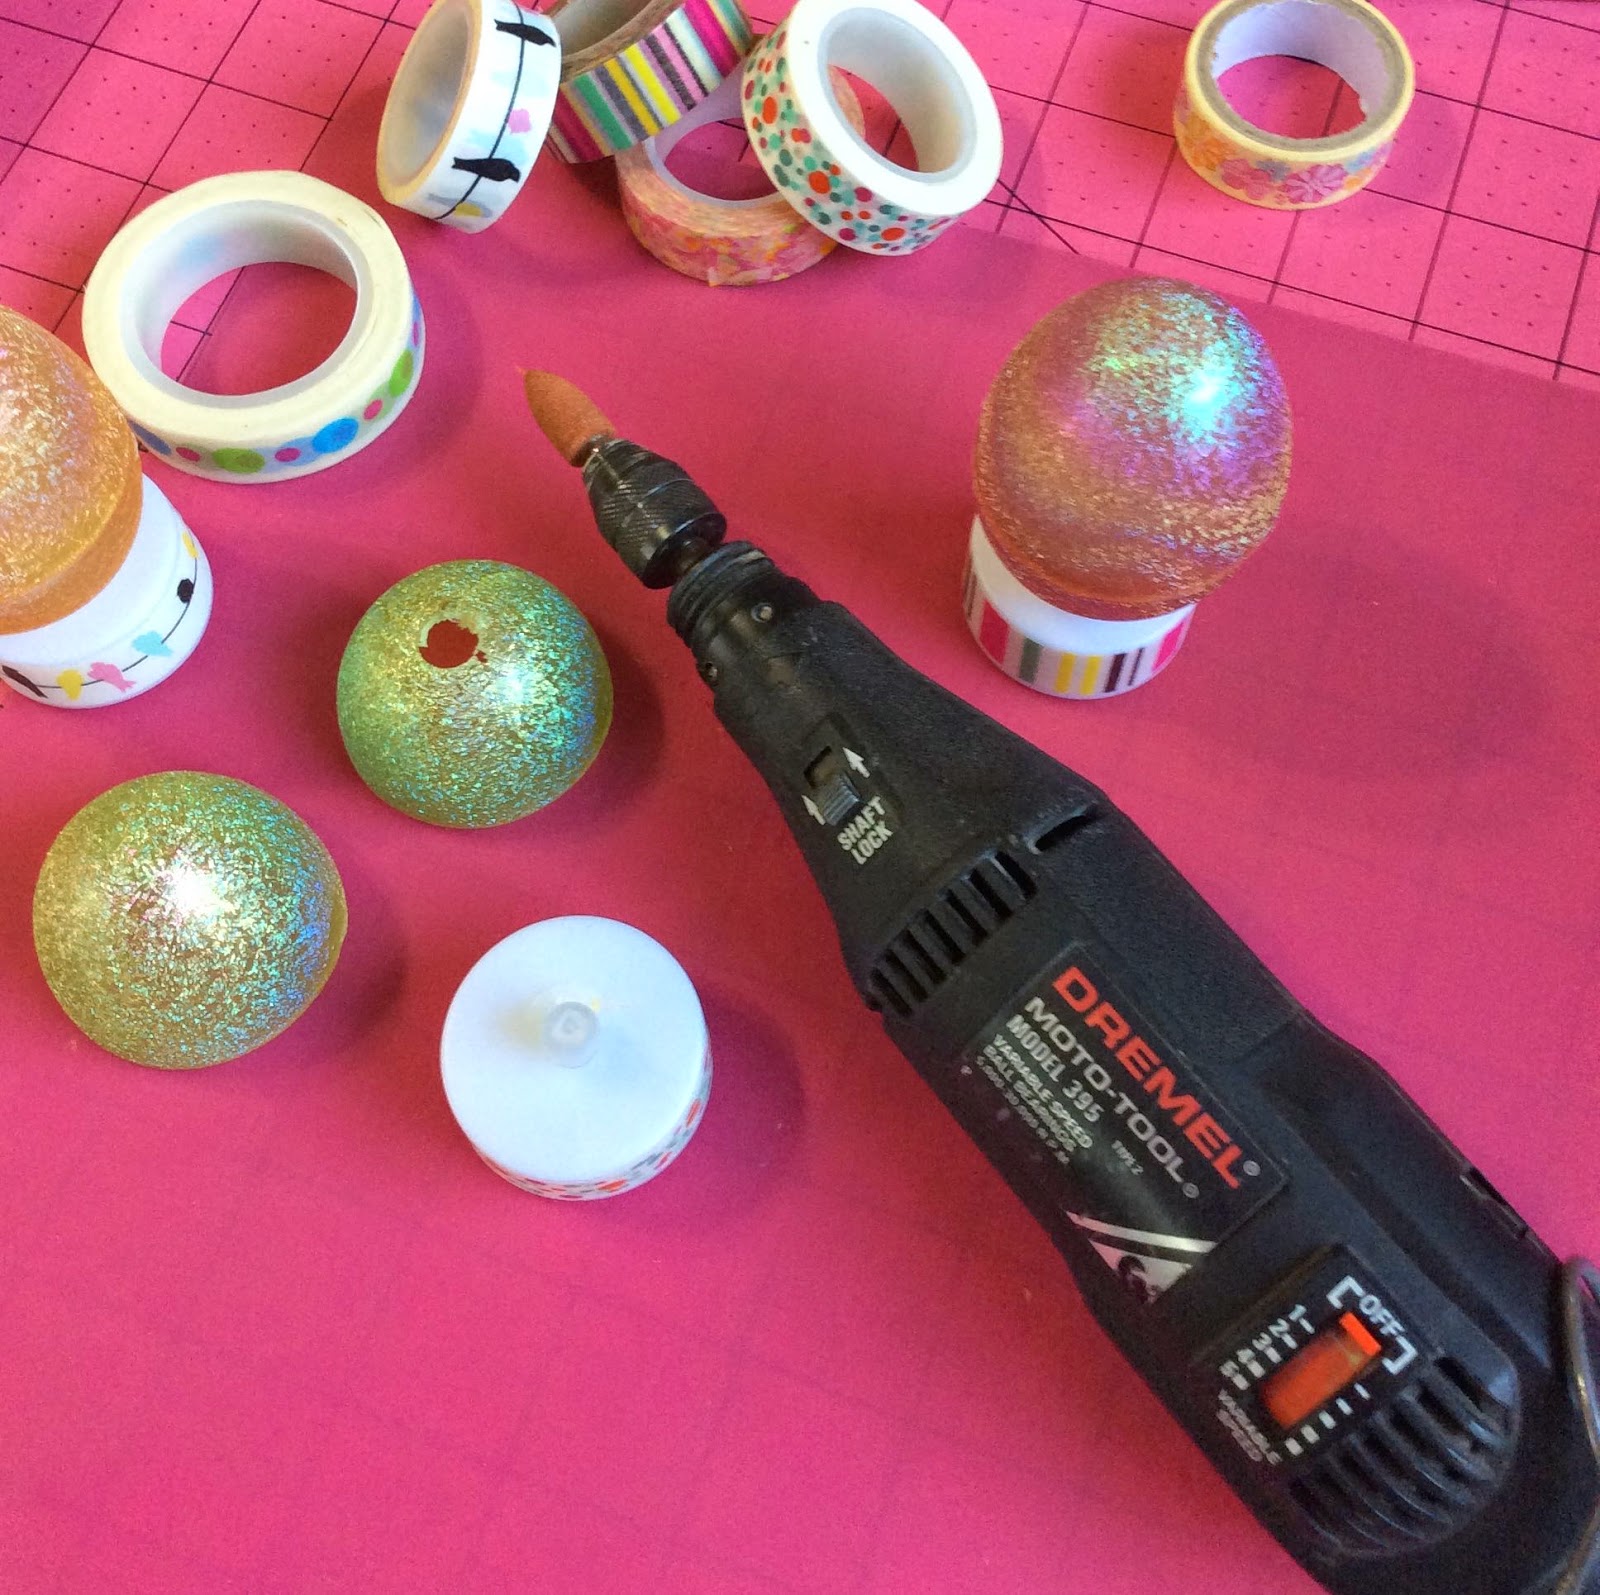 how to drill hole in plastic egg with Dremel stefanie girard